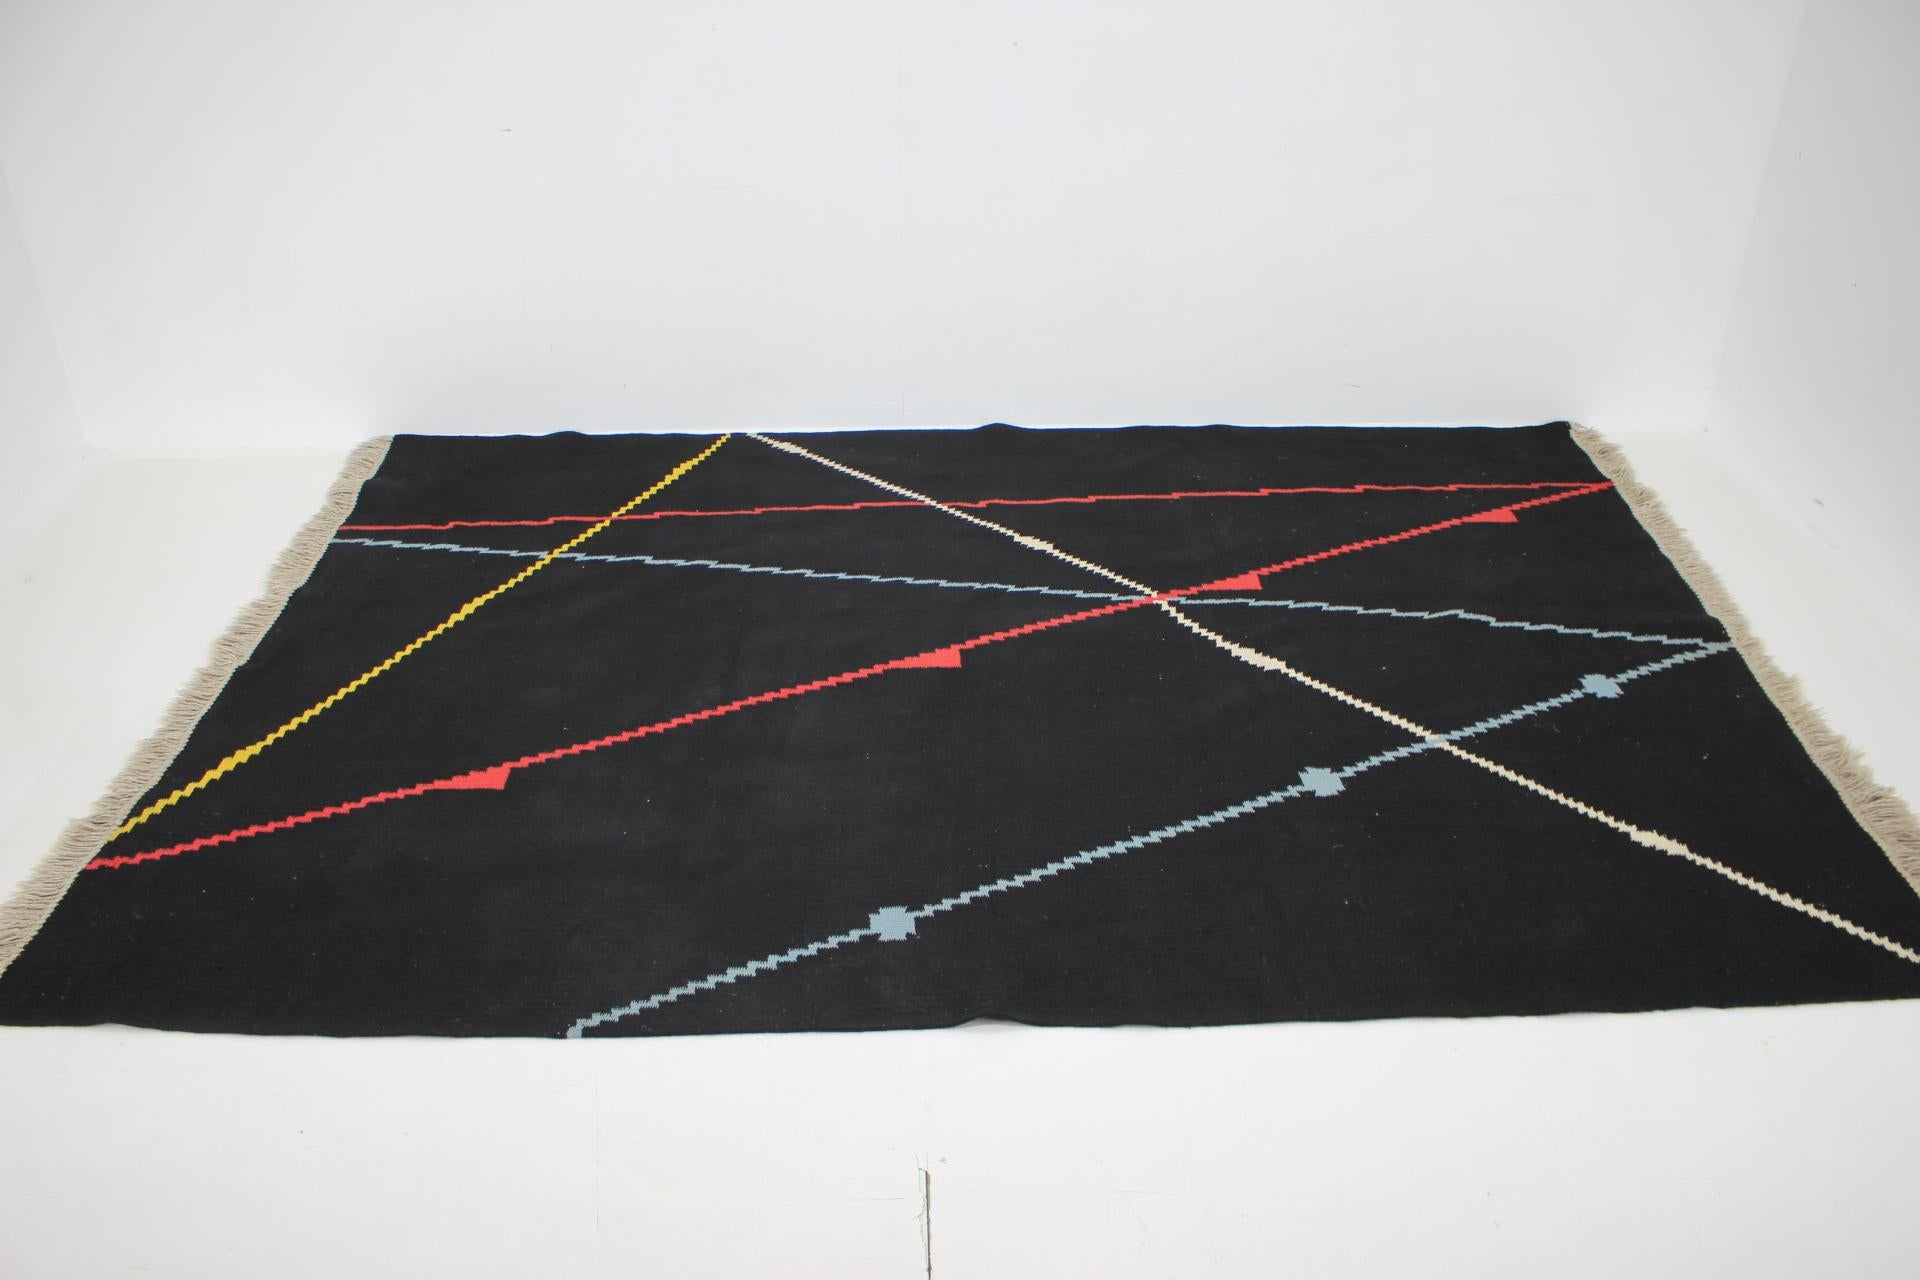 Czech 1940s Bauhaus Geometric Carpet/Rug, Up to 2 Items Available For Sale